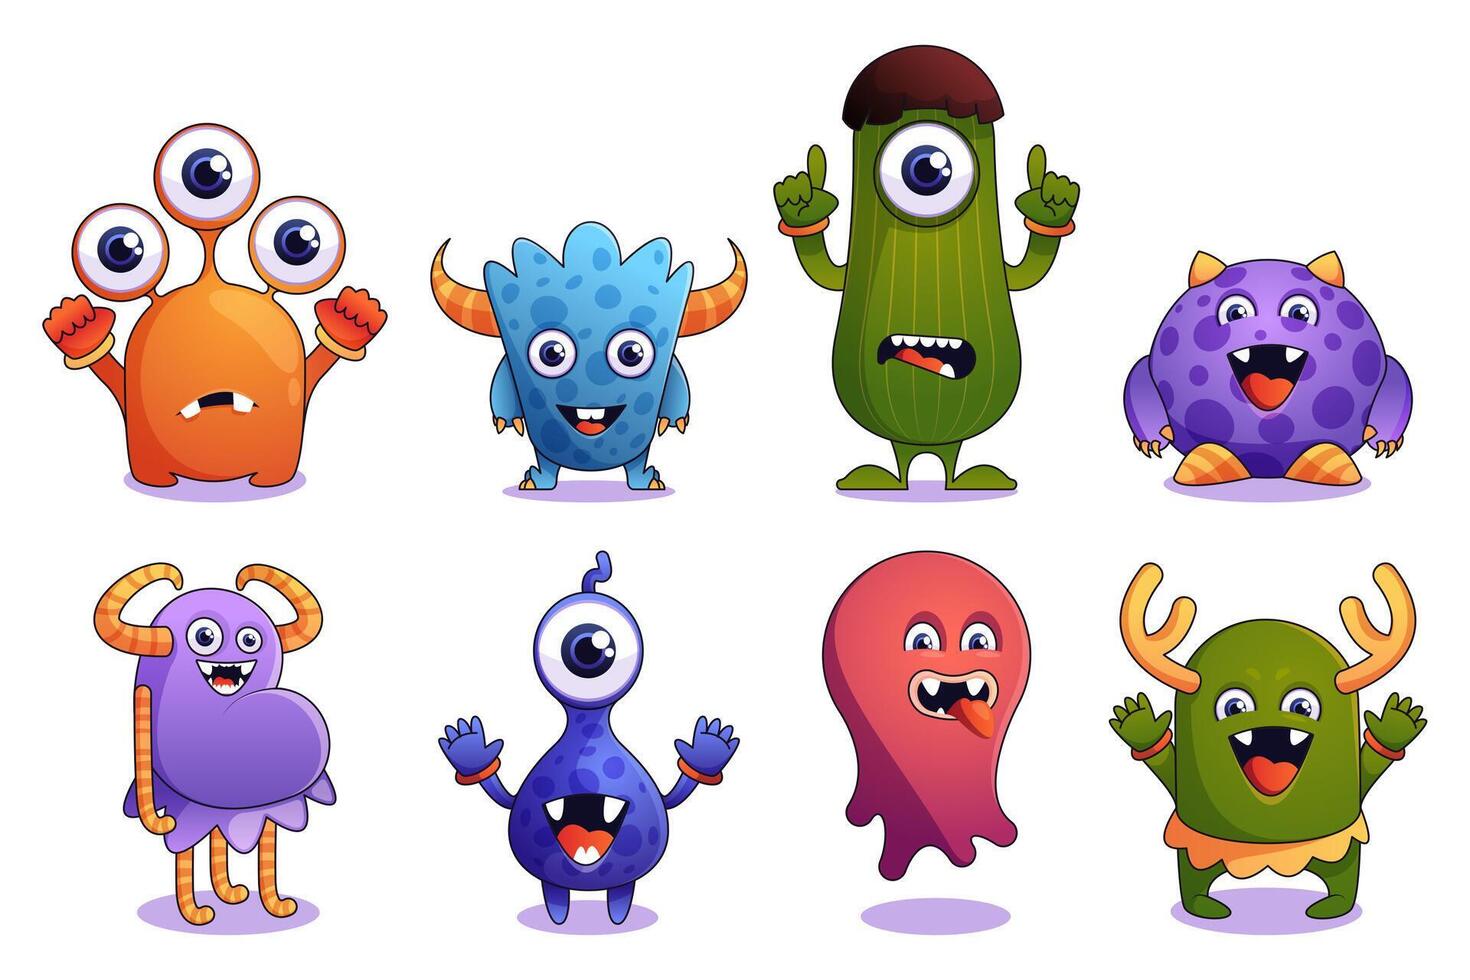 Cute monsters. Cartoon colorful fairy creature with funny eyes and mouth, alien animal mascot characters in flat style. Vector colorful set